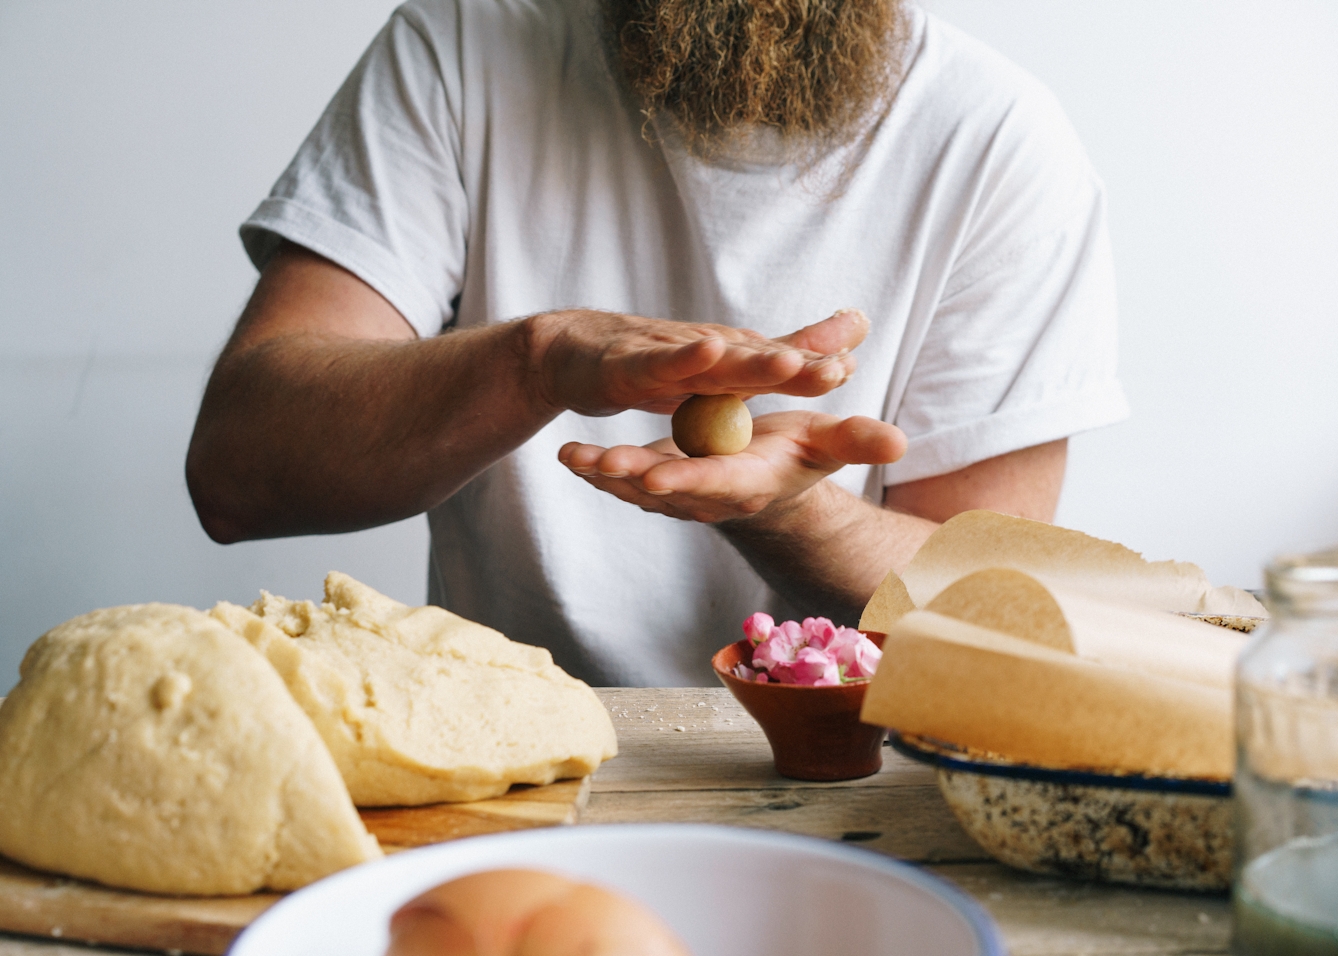 Photograph of a man sat at a wooden kitchen table. Only his torso can be seen along with part of his long beard. He is wearing a white t-shirt. On the tabletop is a dough mixture, a small bowl of flower heads and baking trays lined with greaseproof paper. The man is in the process of rolling the dough into small ball shapes with his hands.